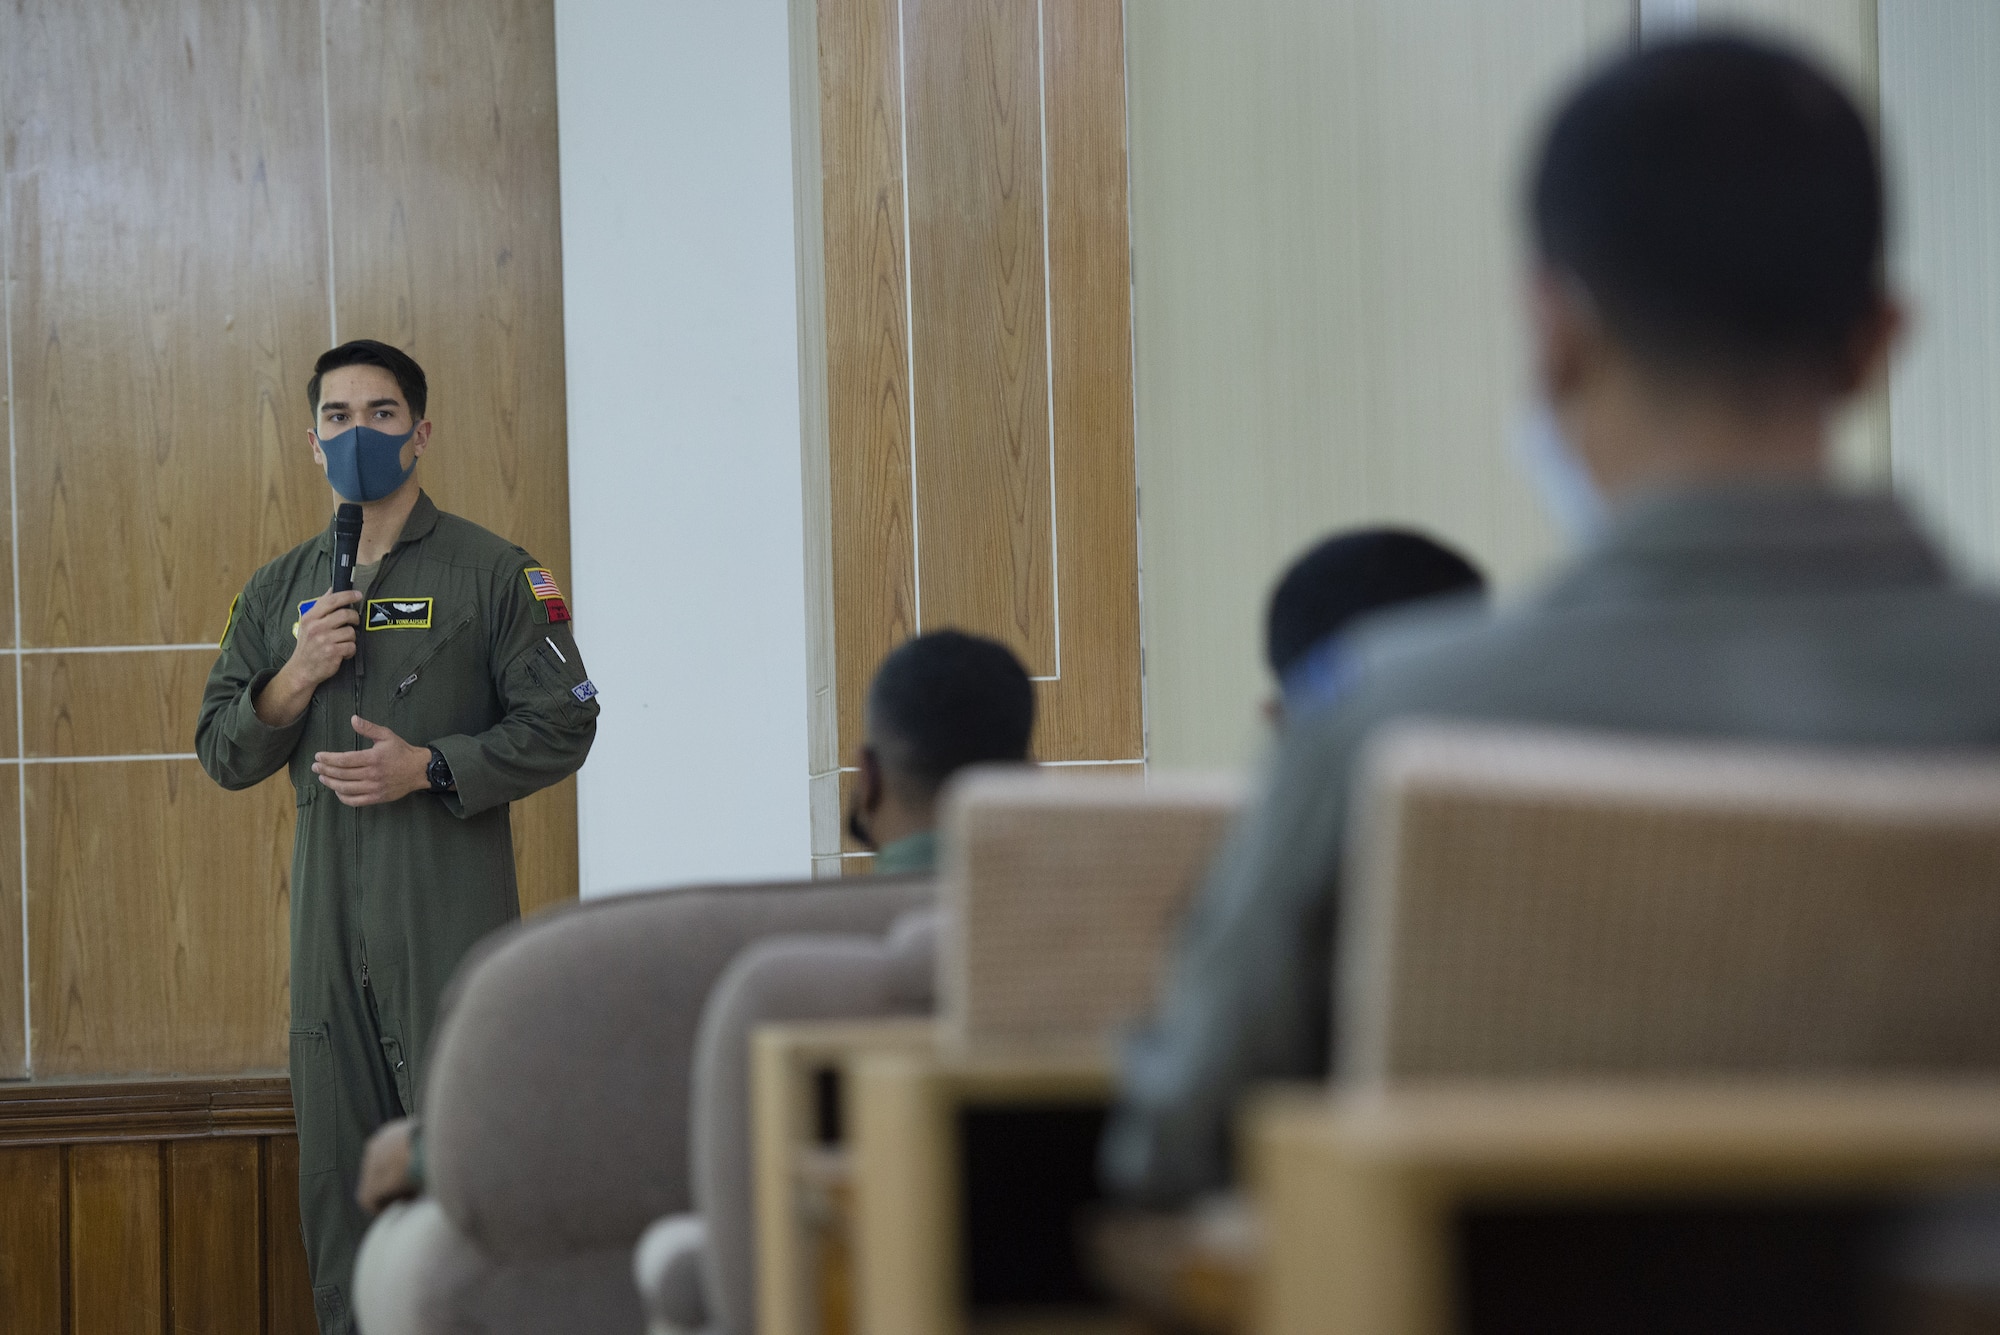 U.S. Air Force 1st Lt. TJ Yonkauske, 36th Expeditionary Airlift Squadron C-130J Super Hercules pilot, briefs Bangladesh air force (BAF) aircrew on crew resource management during a subject matter exchange event as part of Exercise Cope South 2022, Feb. 19, 2022, at BAF Base Bangabandhu, Bangladesh. Discussions during the SME event also included best practices on low level flight, aircrew flight equipment nomenclature and C-130J Super Hercules aircraft capabilities. Exercise Cope South is a Pacific Air Forces-sponsored bilateral tactical airlift exercise designed to enhance the interoperability between the U.S. Air Force and BAF.